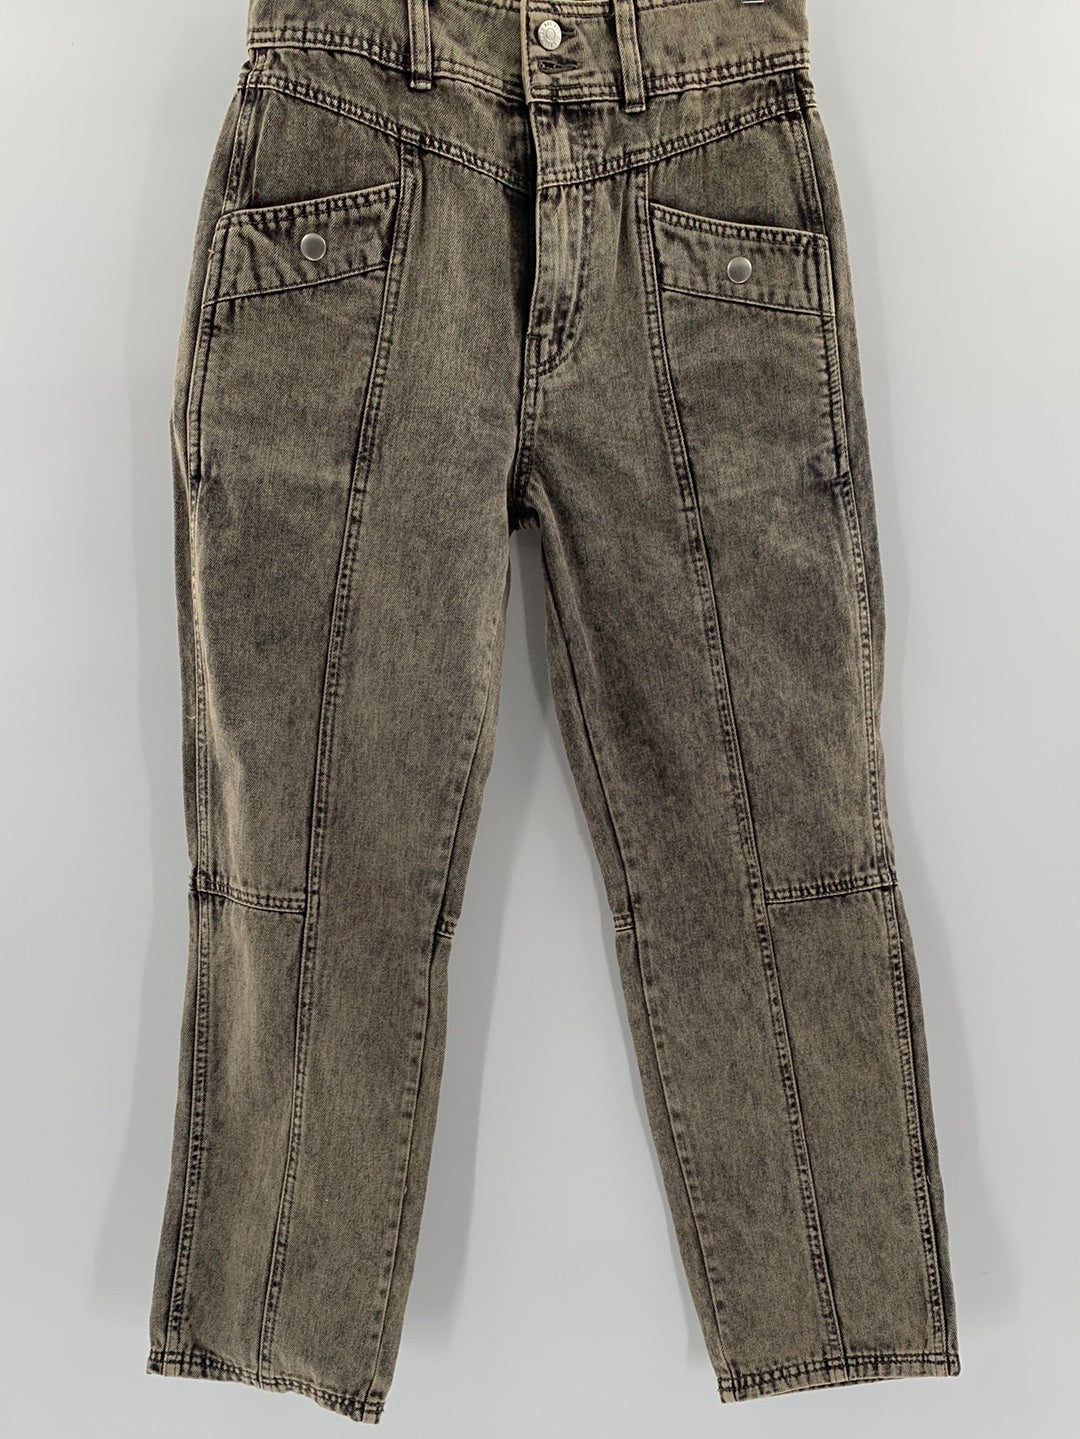 BDG Urban Outfitters Straight Leg Jeans (Size 27)